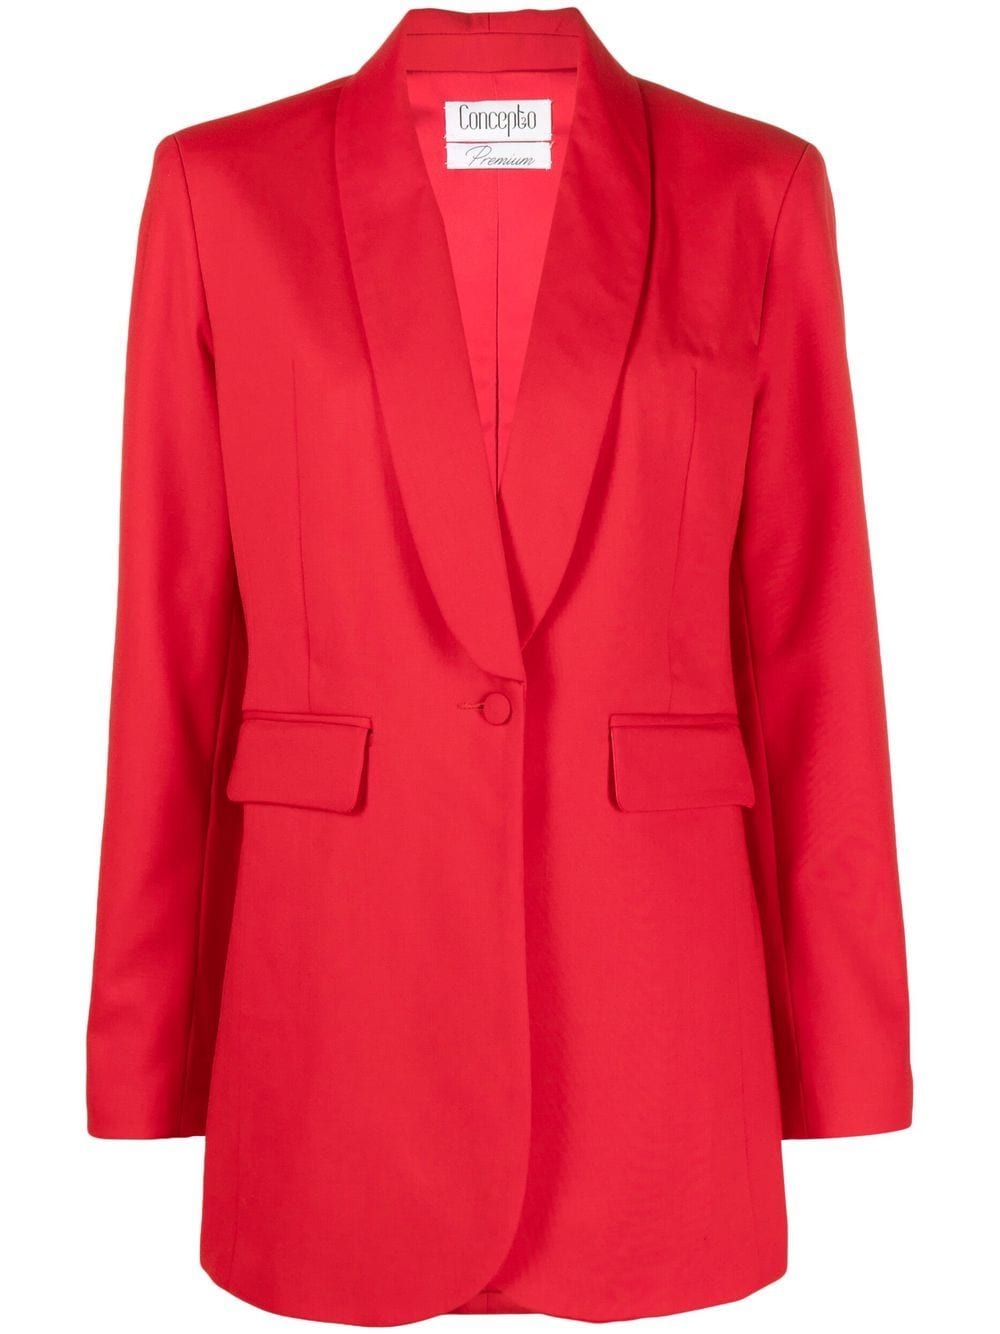 Concepto Single Breasted Blazer In Red